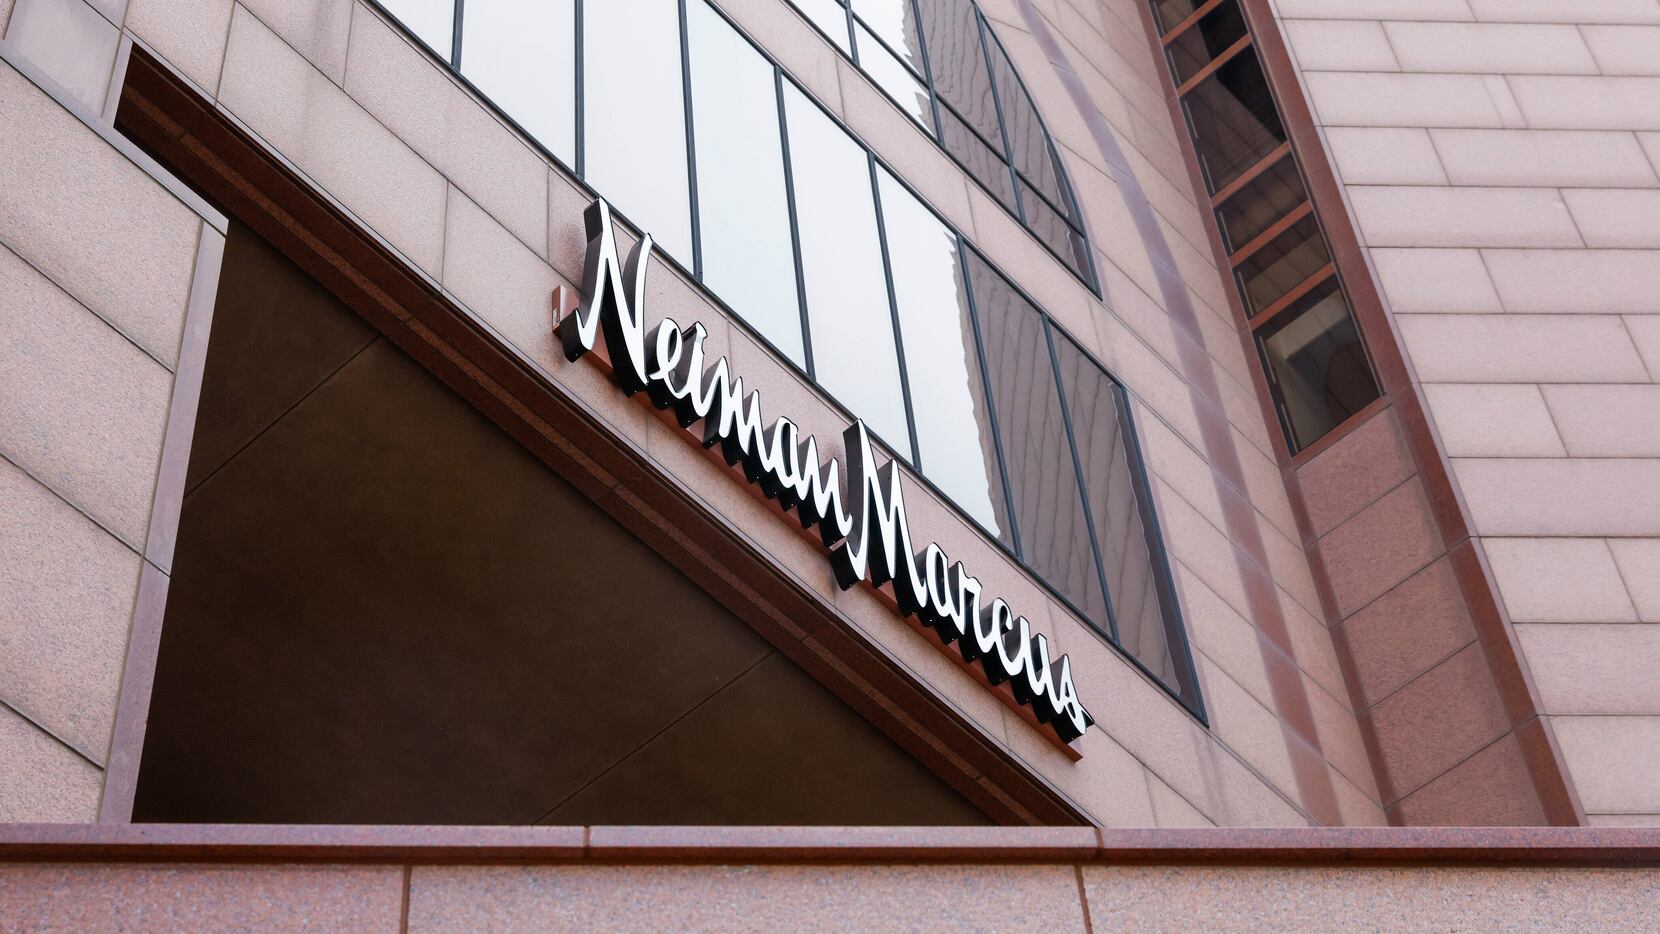 After weeks of rumors, Dallas-based Neiman Marcus declares bankruptcy -  CultureMap Dallas